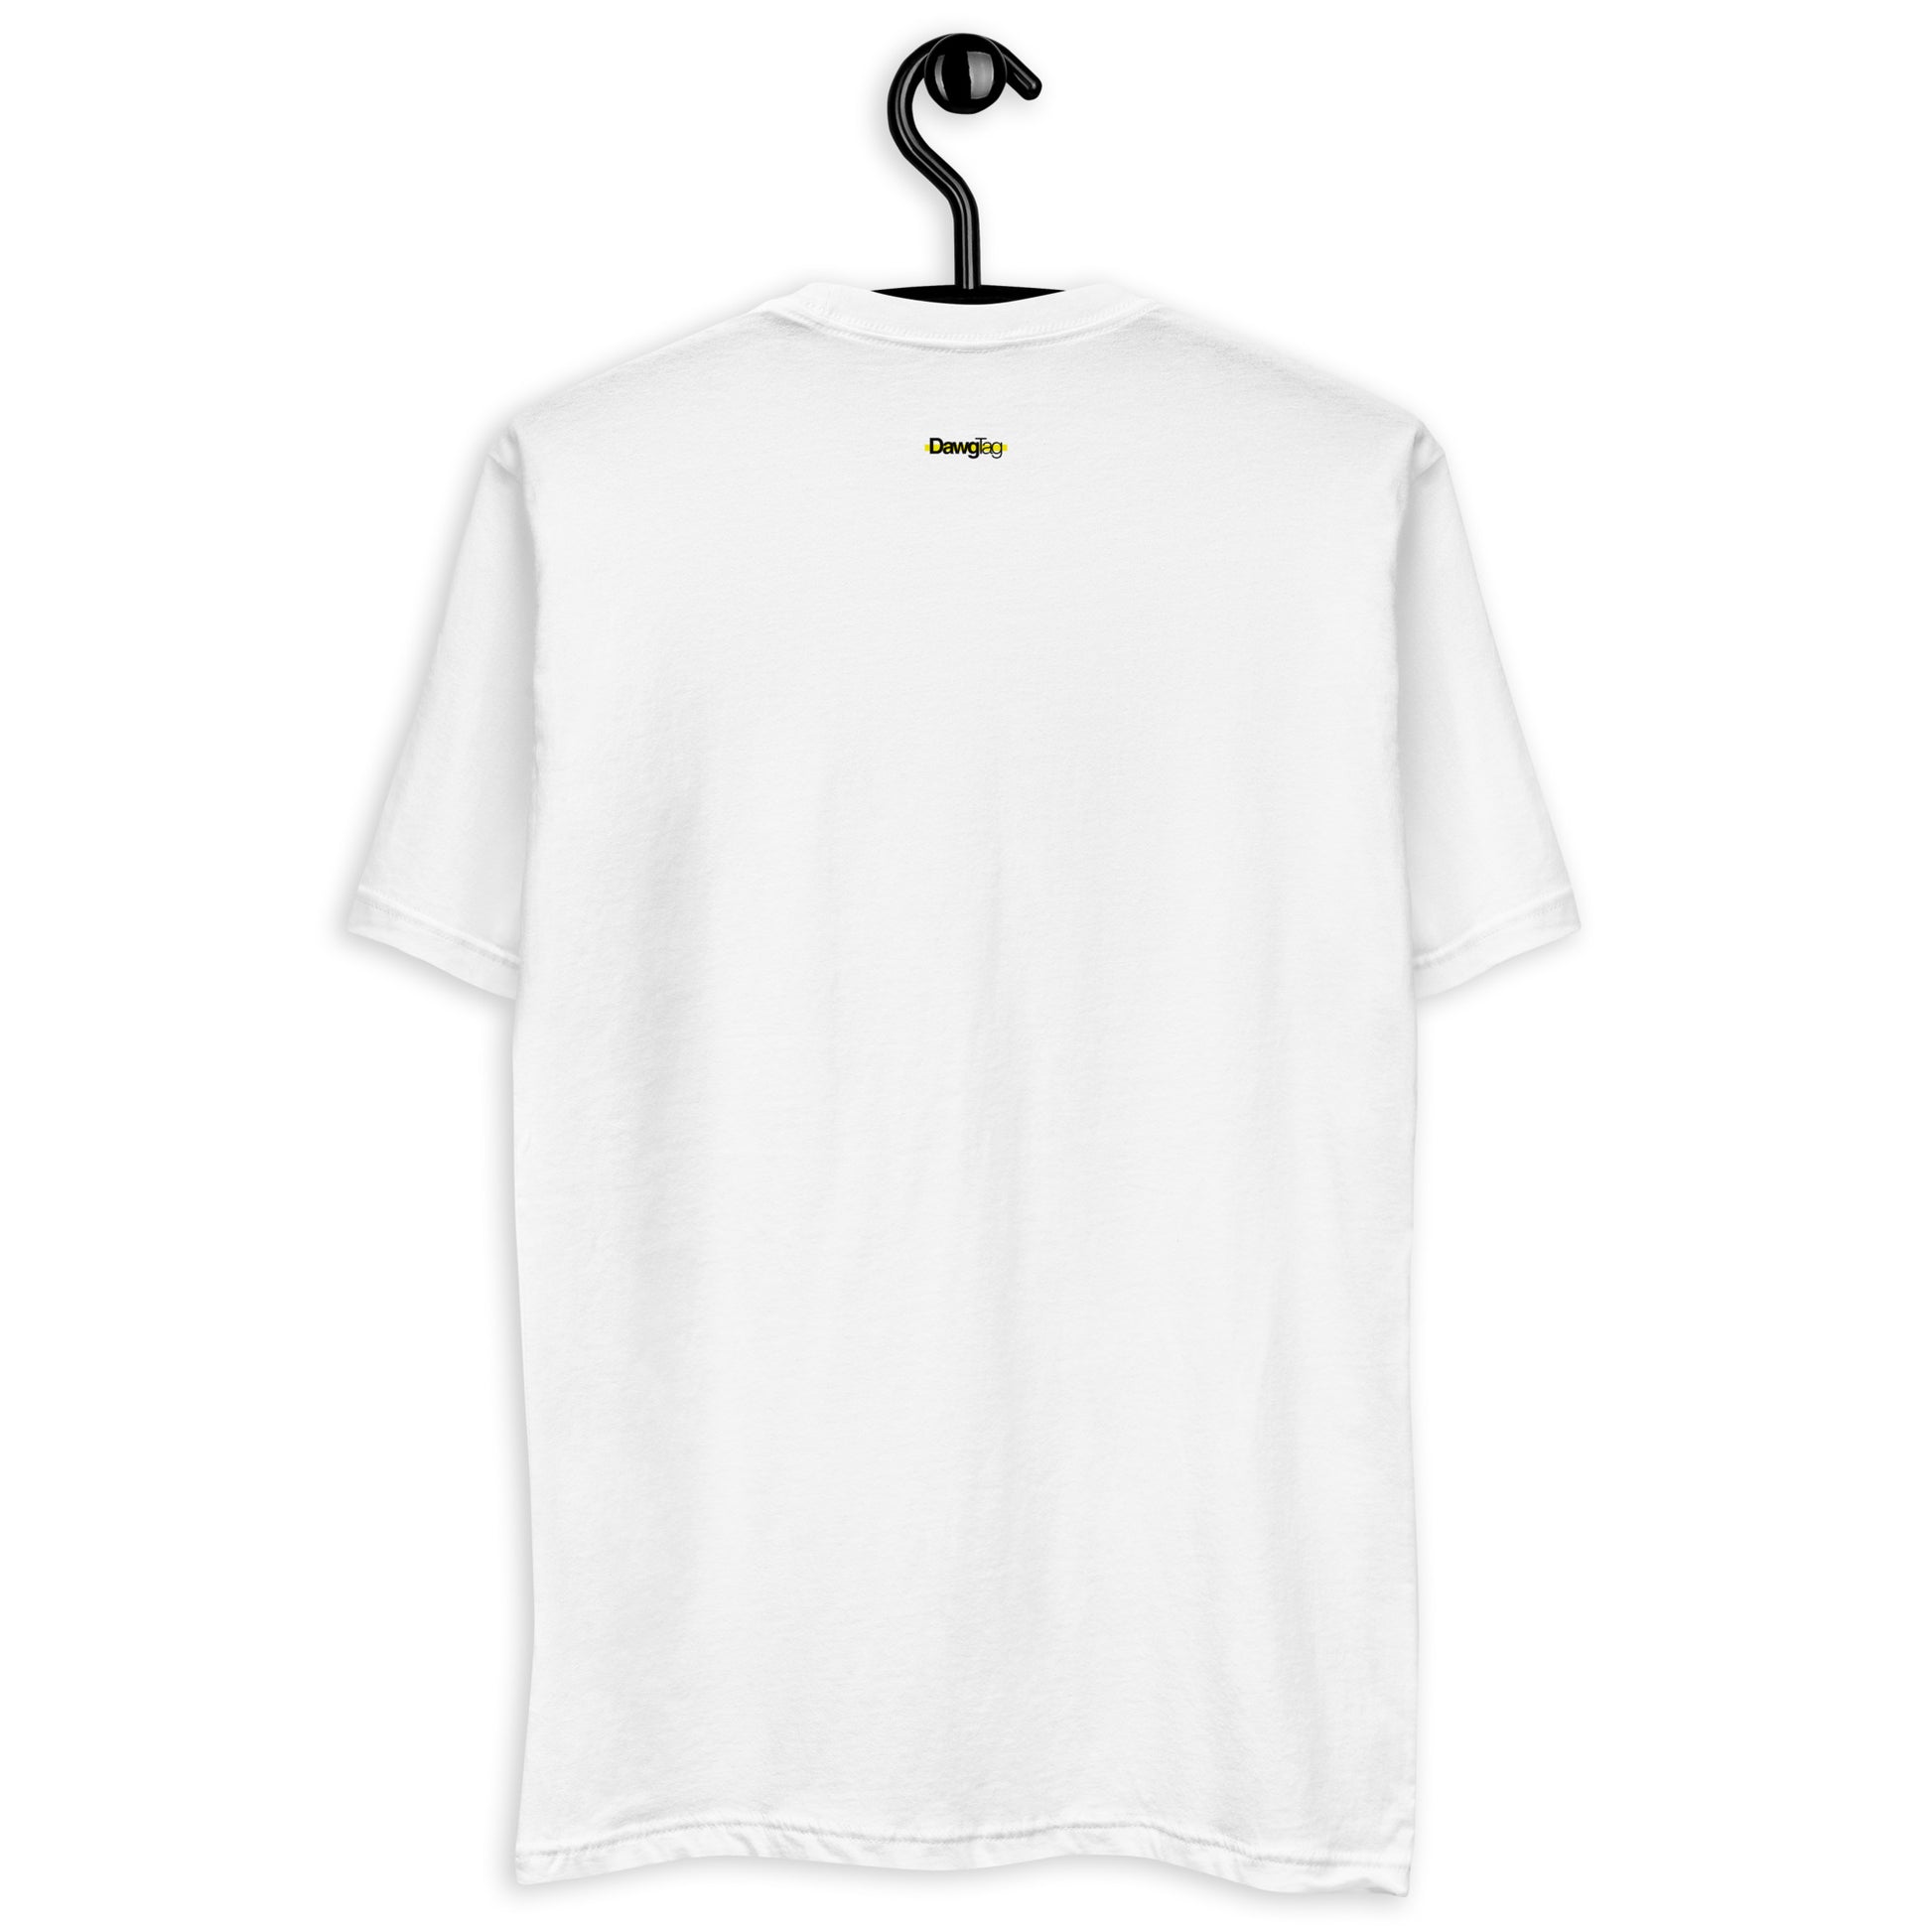 Back view of a white slim-fit t-shirt with a logo